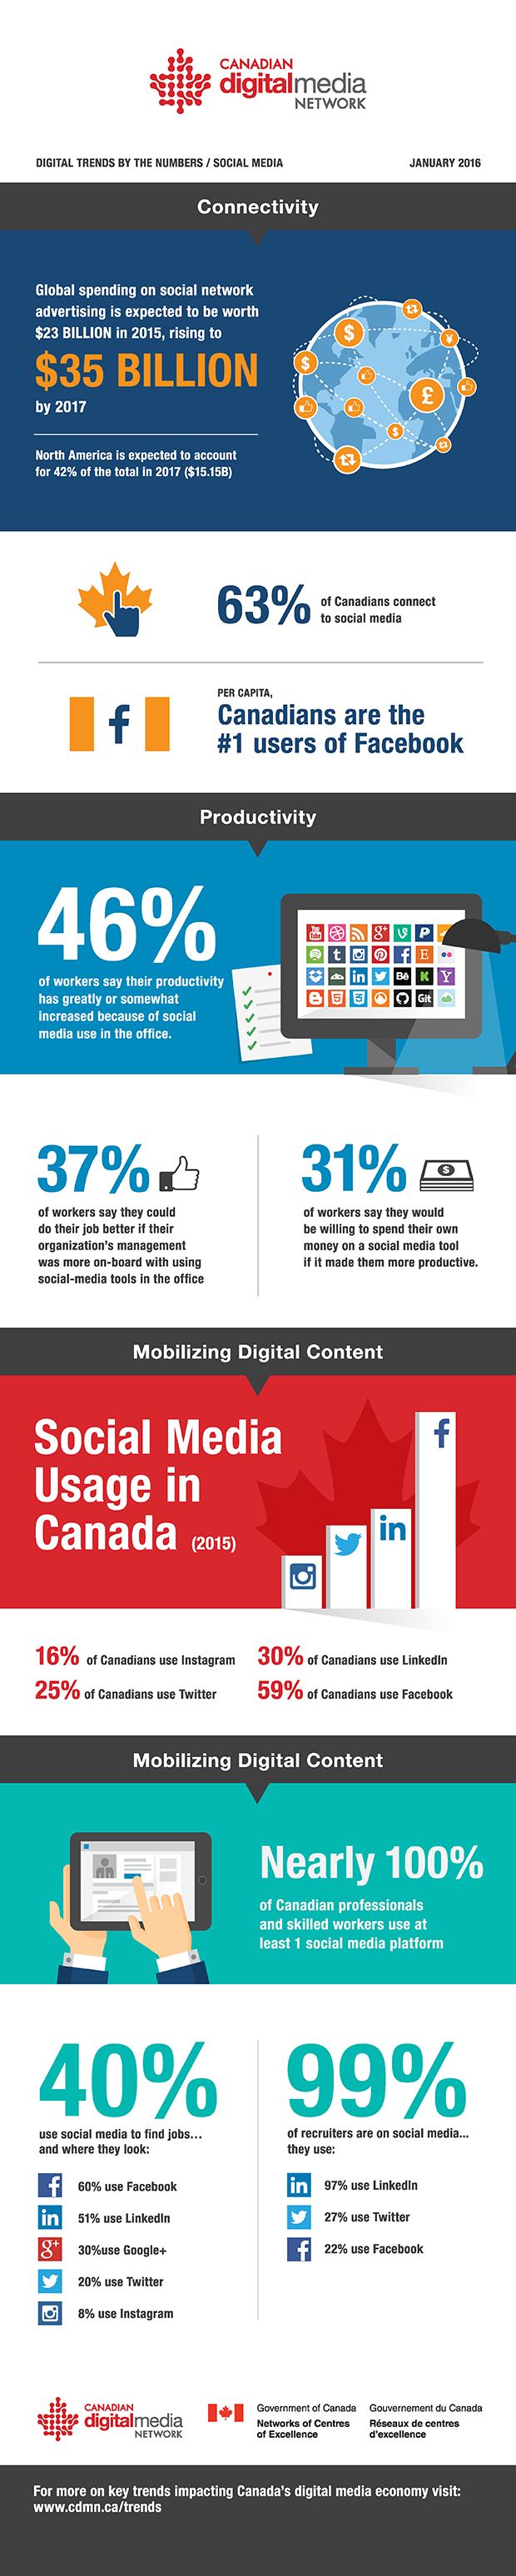 Digital trends by the numbers/social media infographic